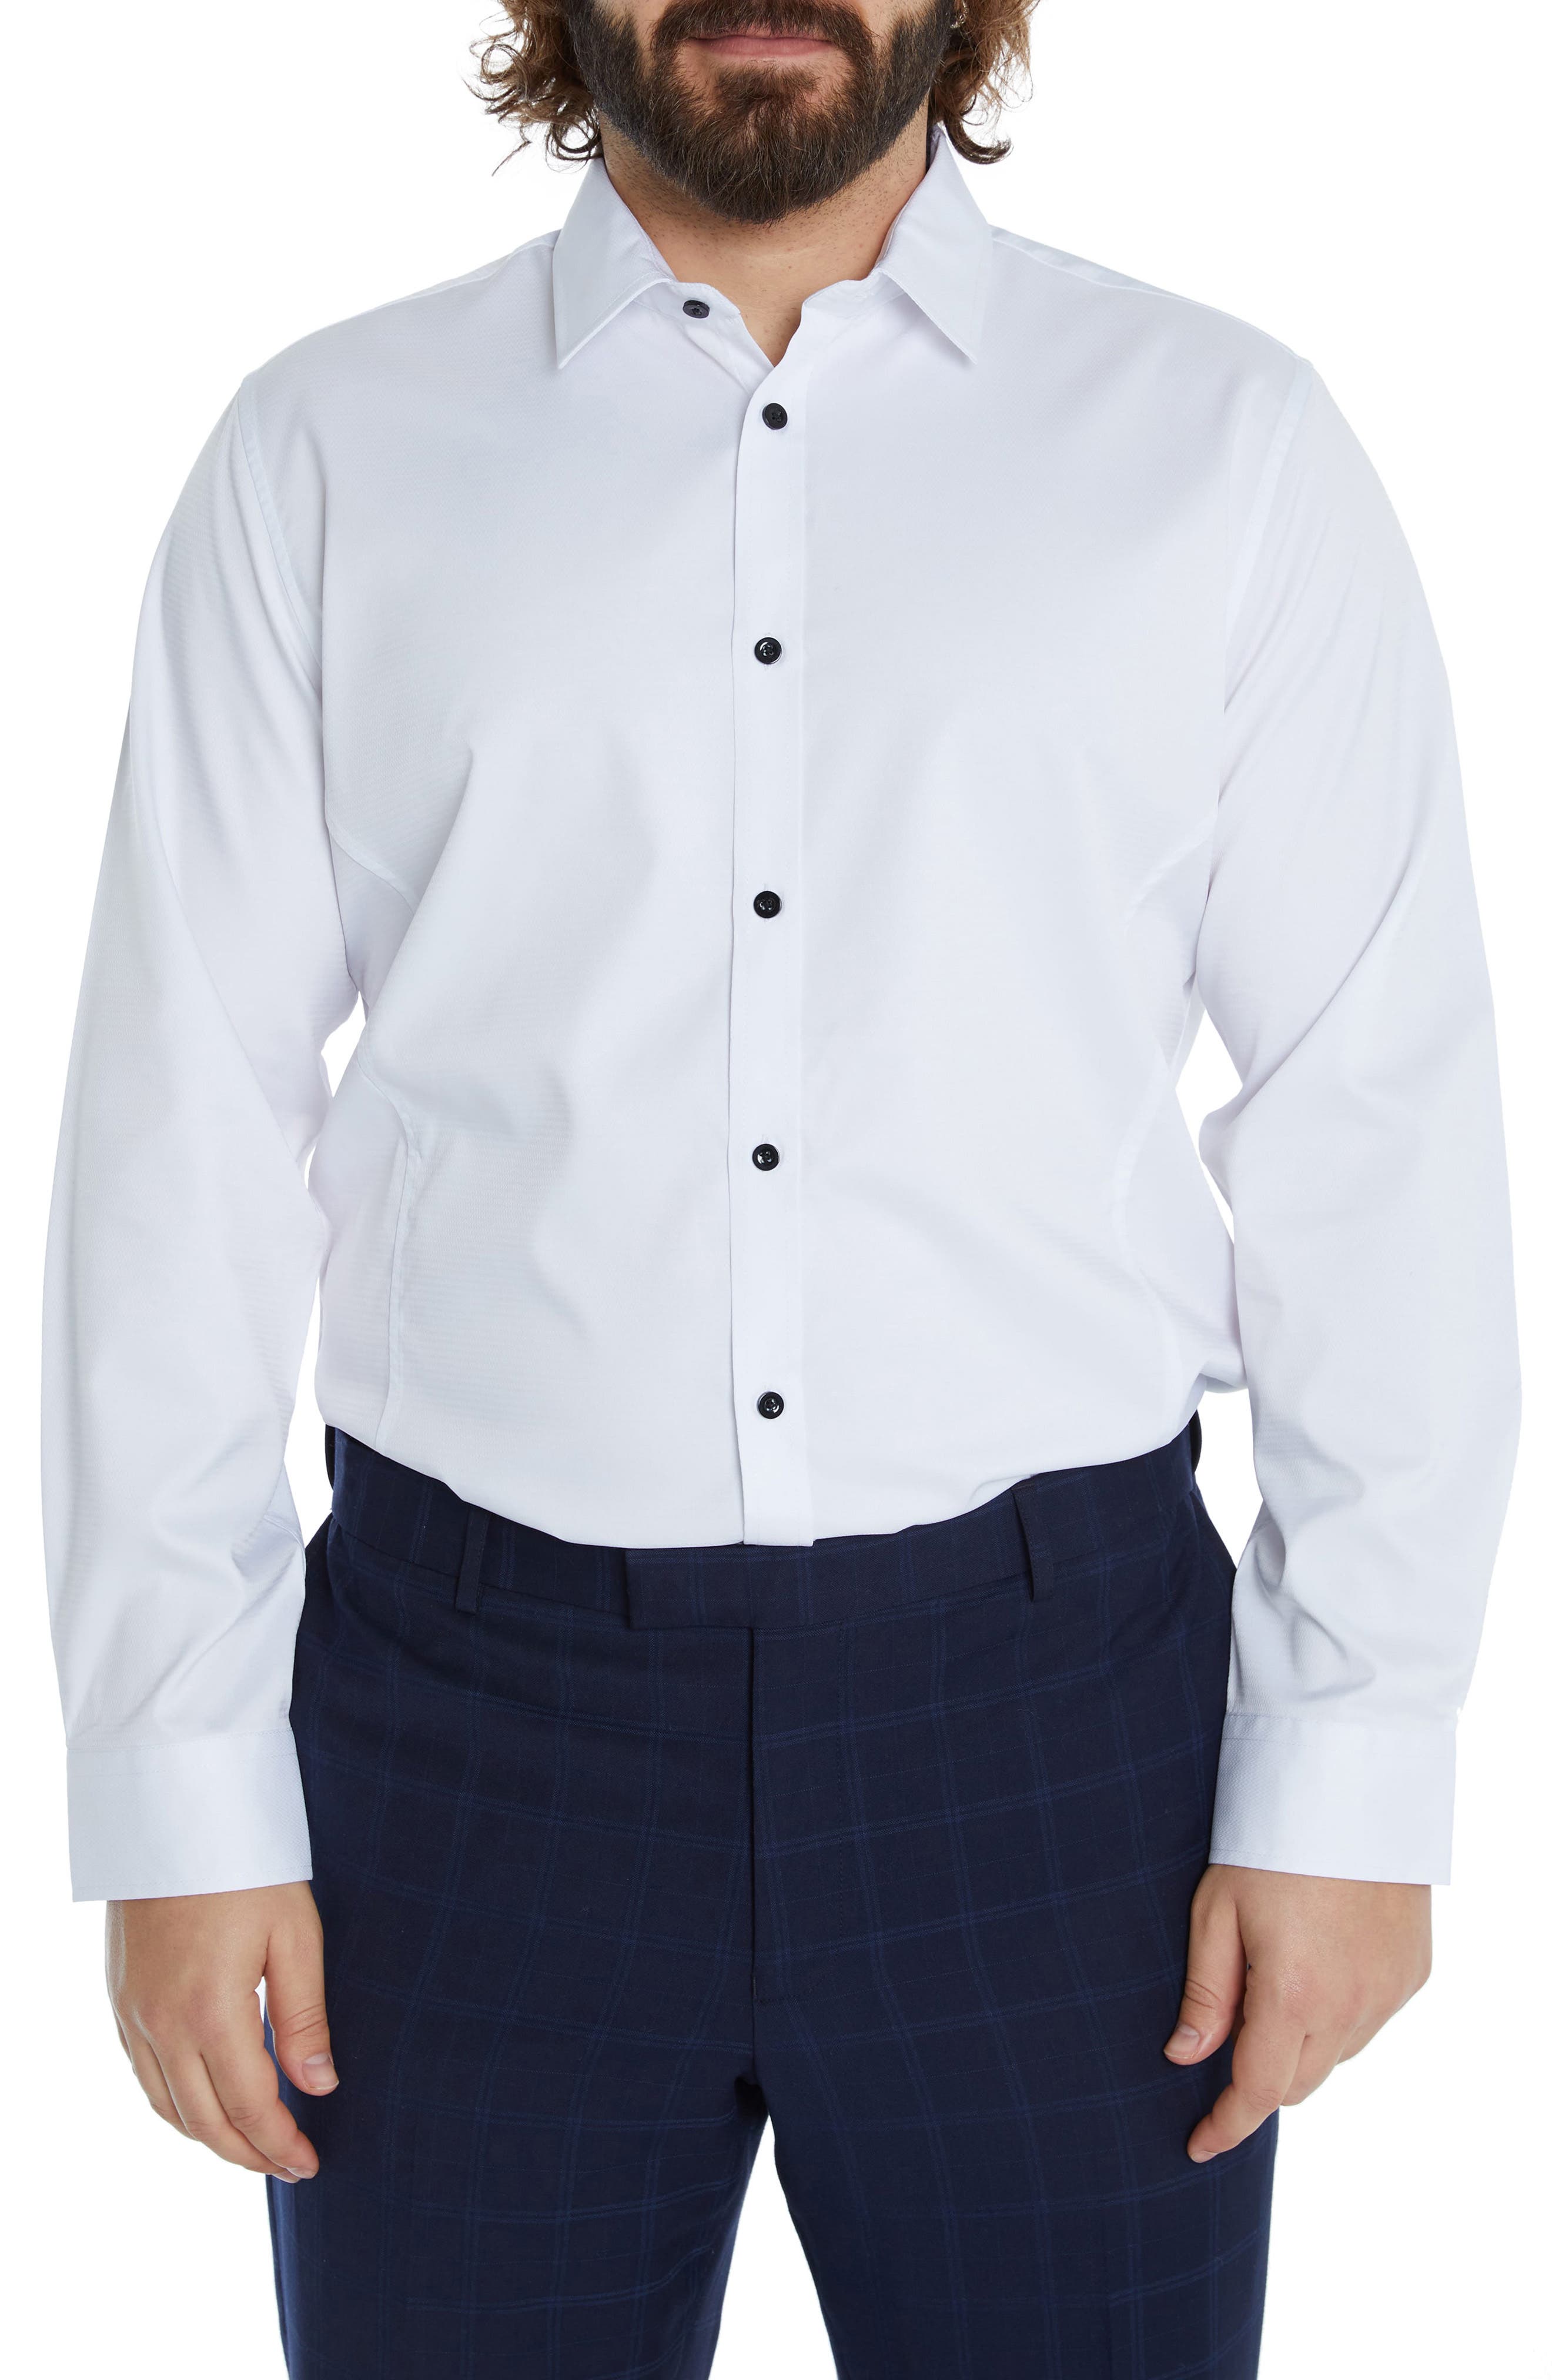 Johnny Bigg Linton Regular Fit Stretch Button-Up Shirt in White at Nordstrom